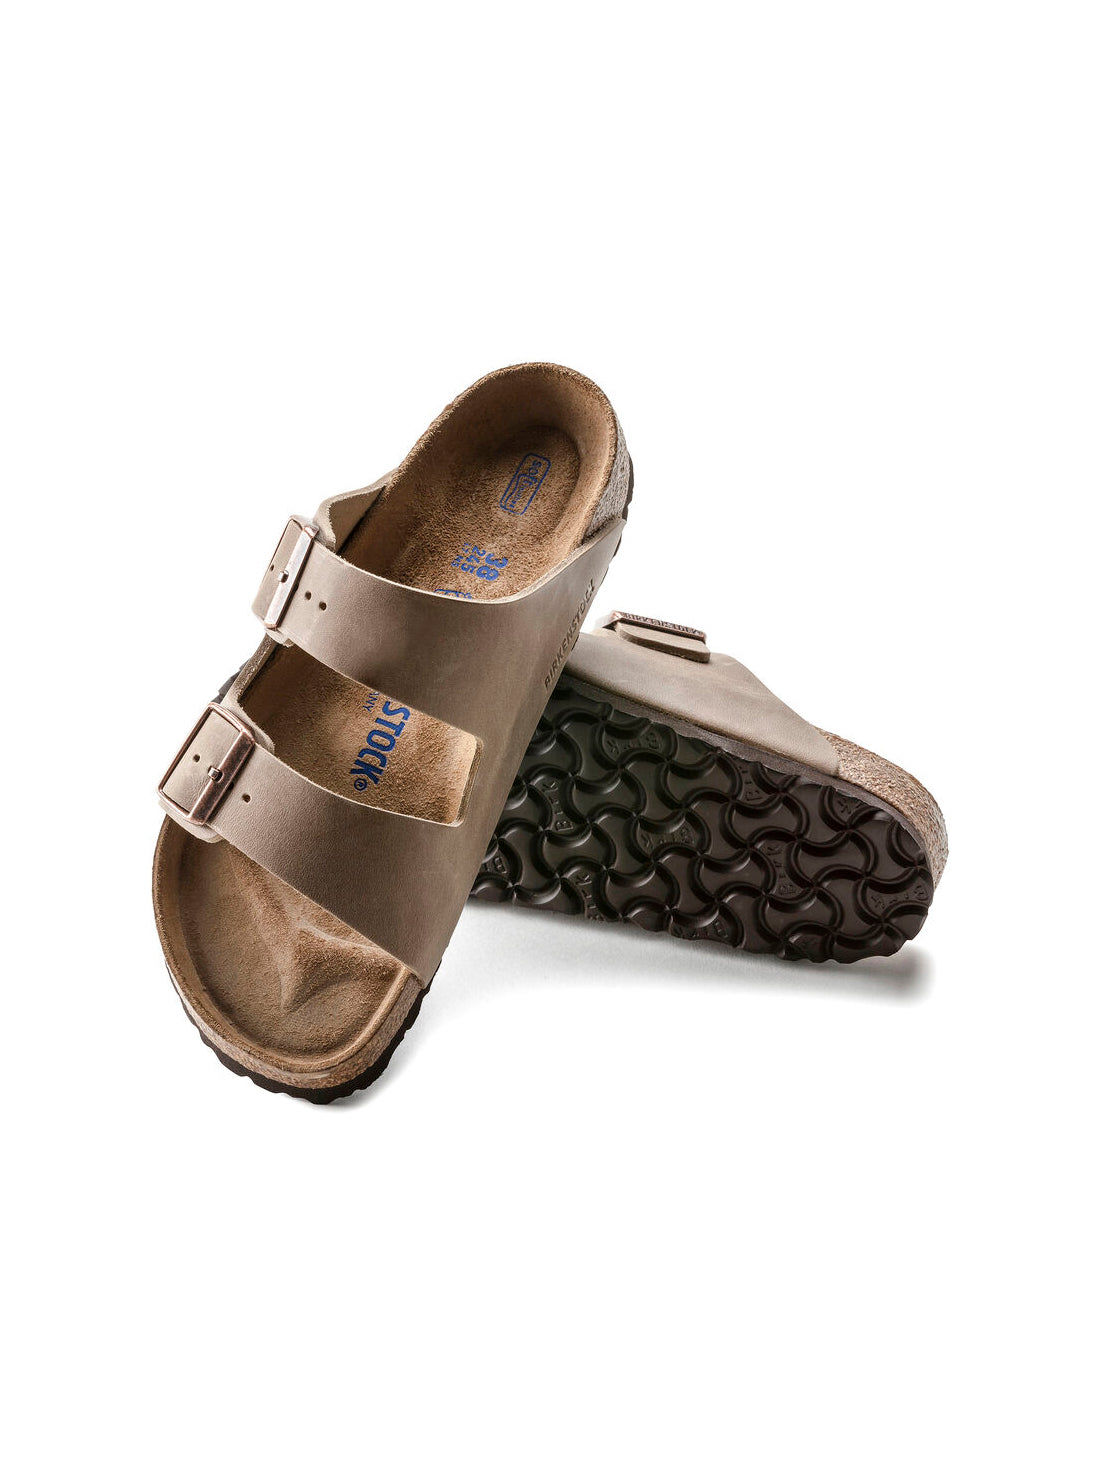 birkenstock arizona soft footbed sandals in oiled leather tobacco brown narrow